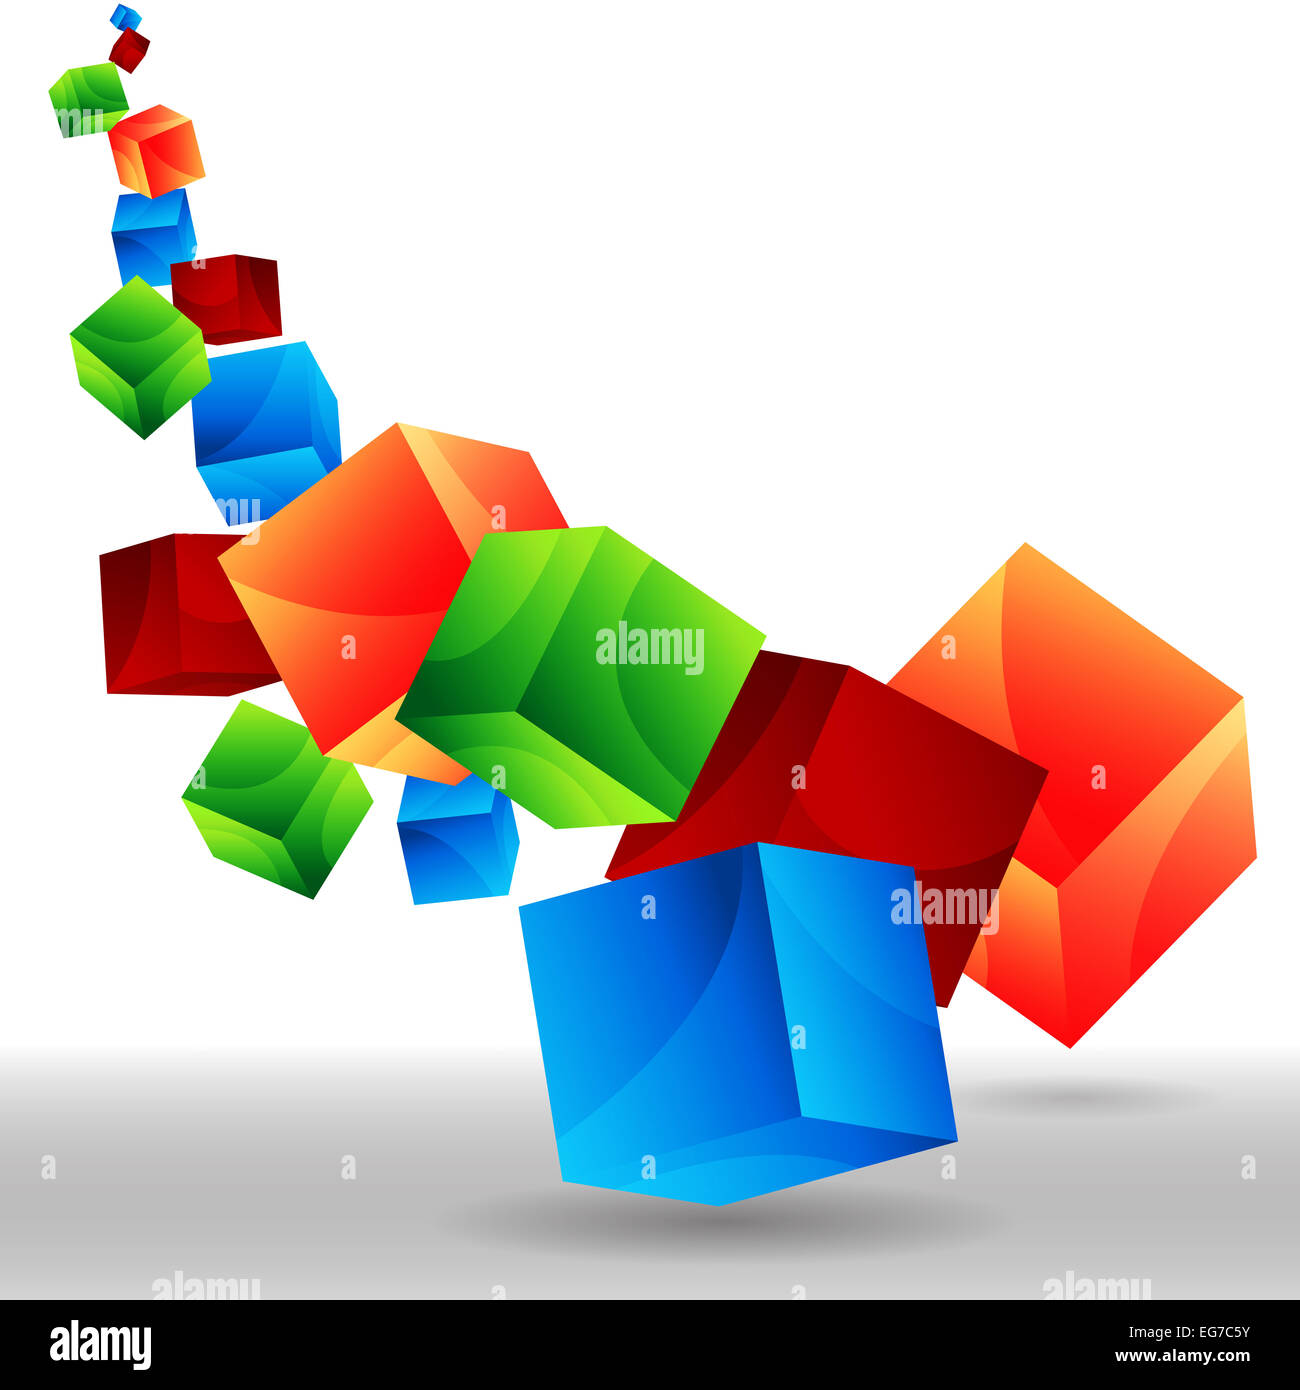 An image of falling 3d cubes. Stock Photo